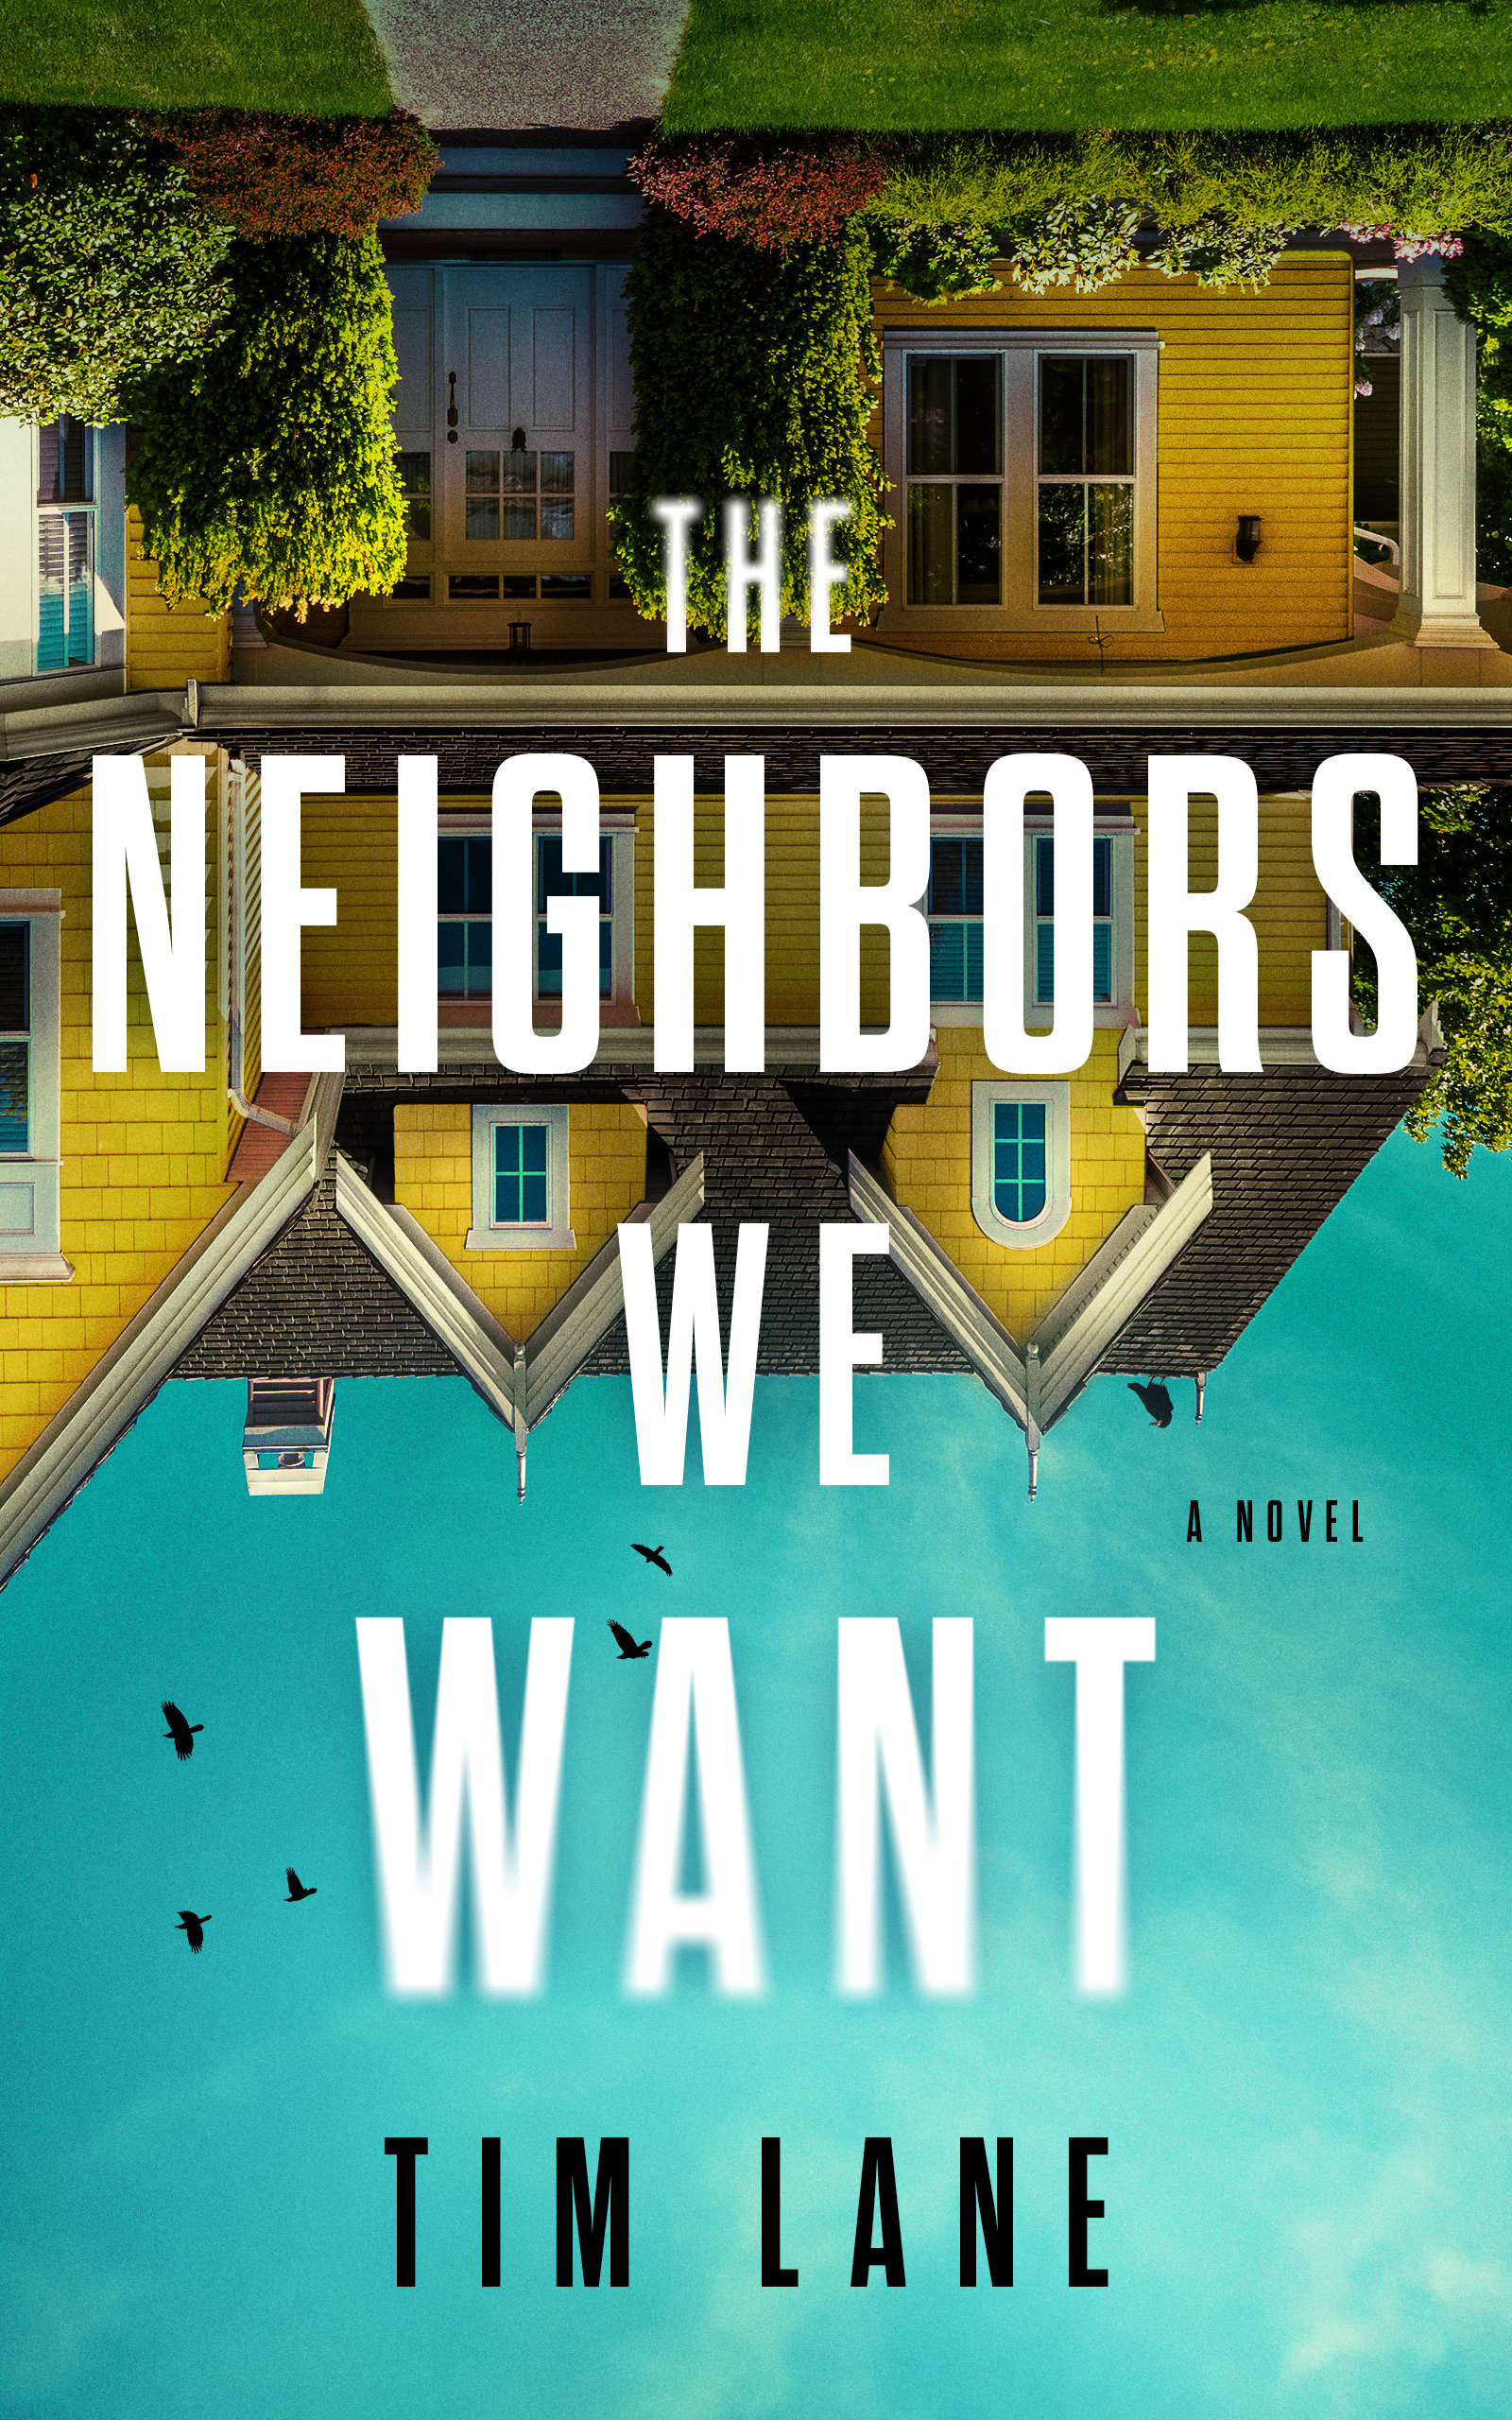 The Neighbors We Want (Hardcover Book)